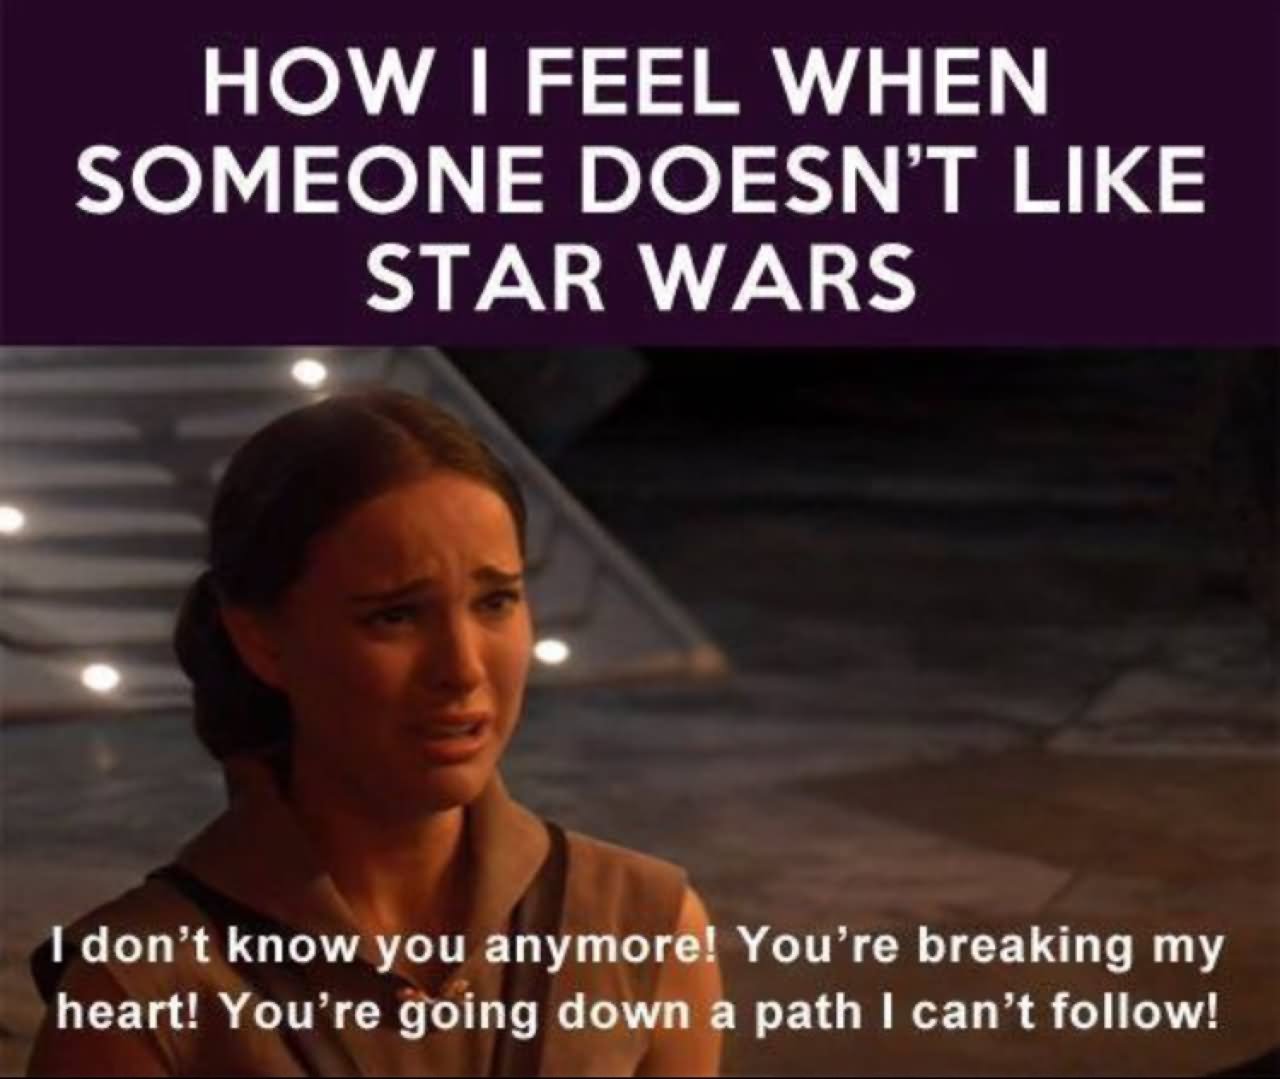 Funny Star War Meme How I Feel When Someone Doesn't Like Star Wars Image